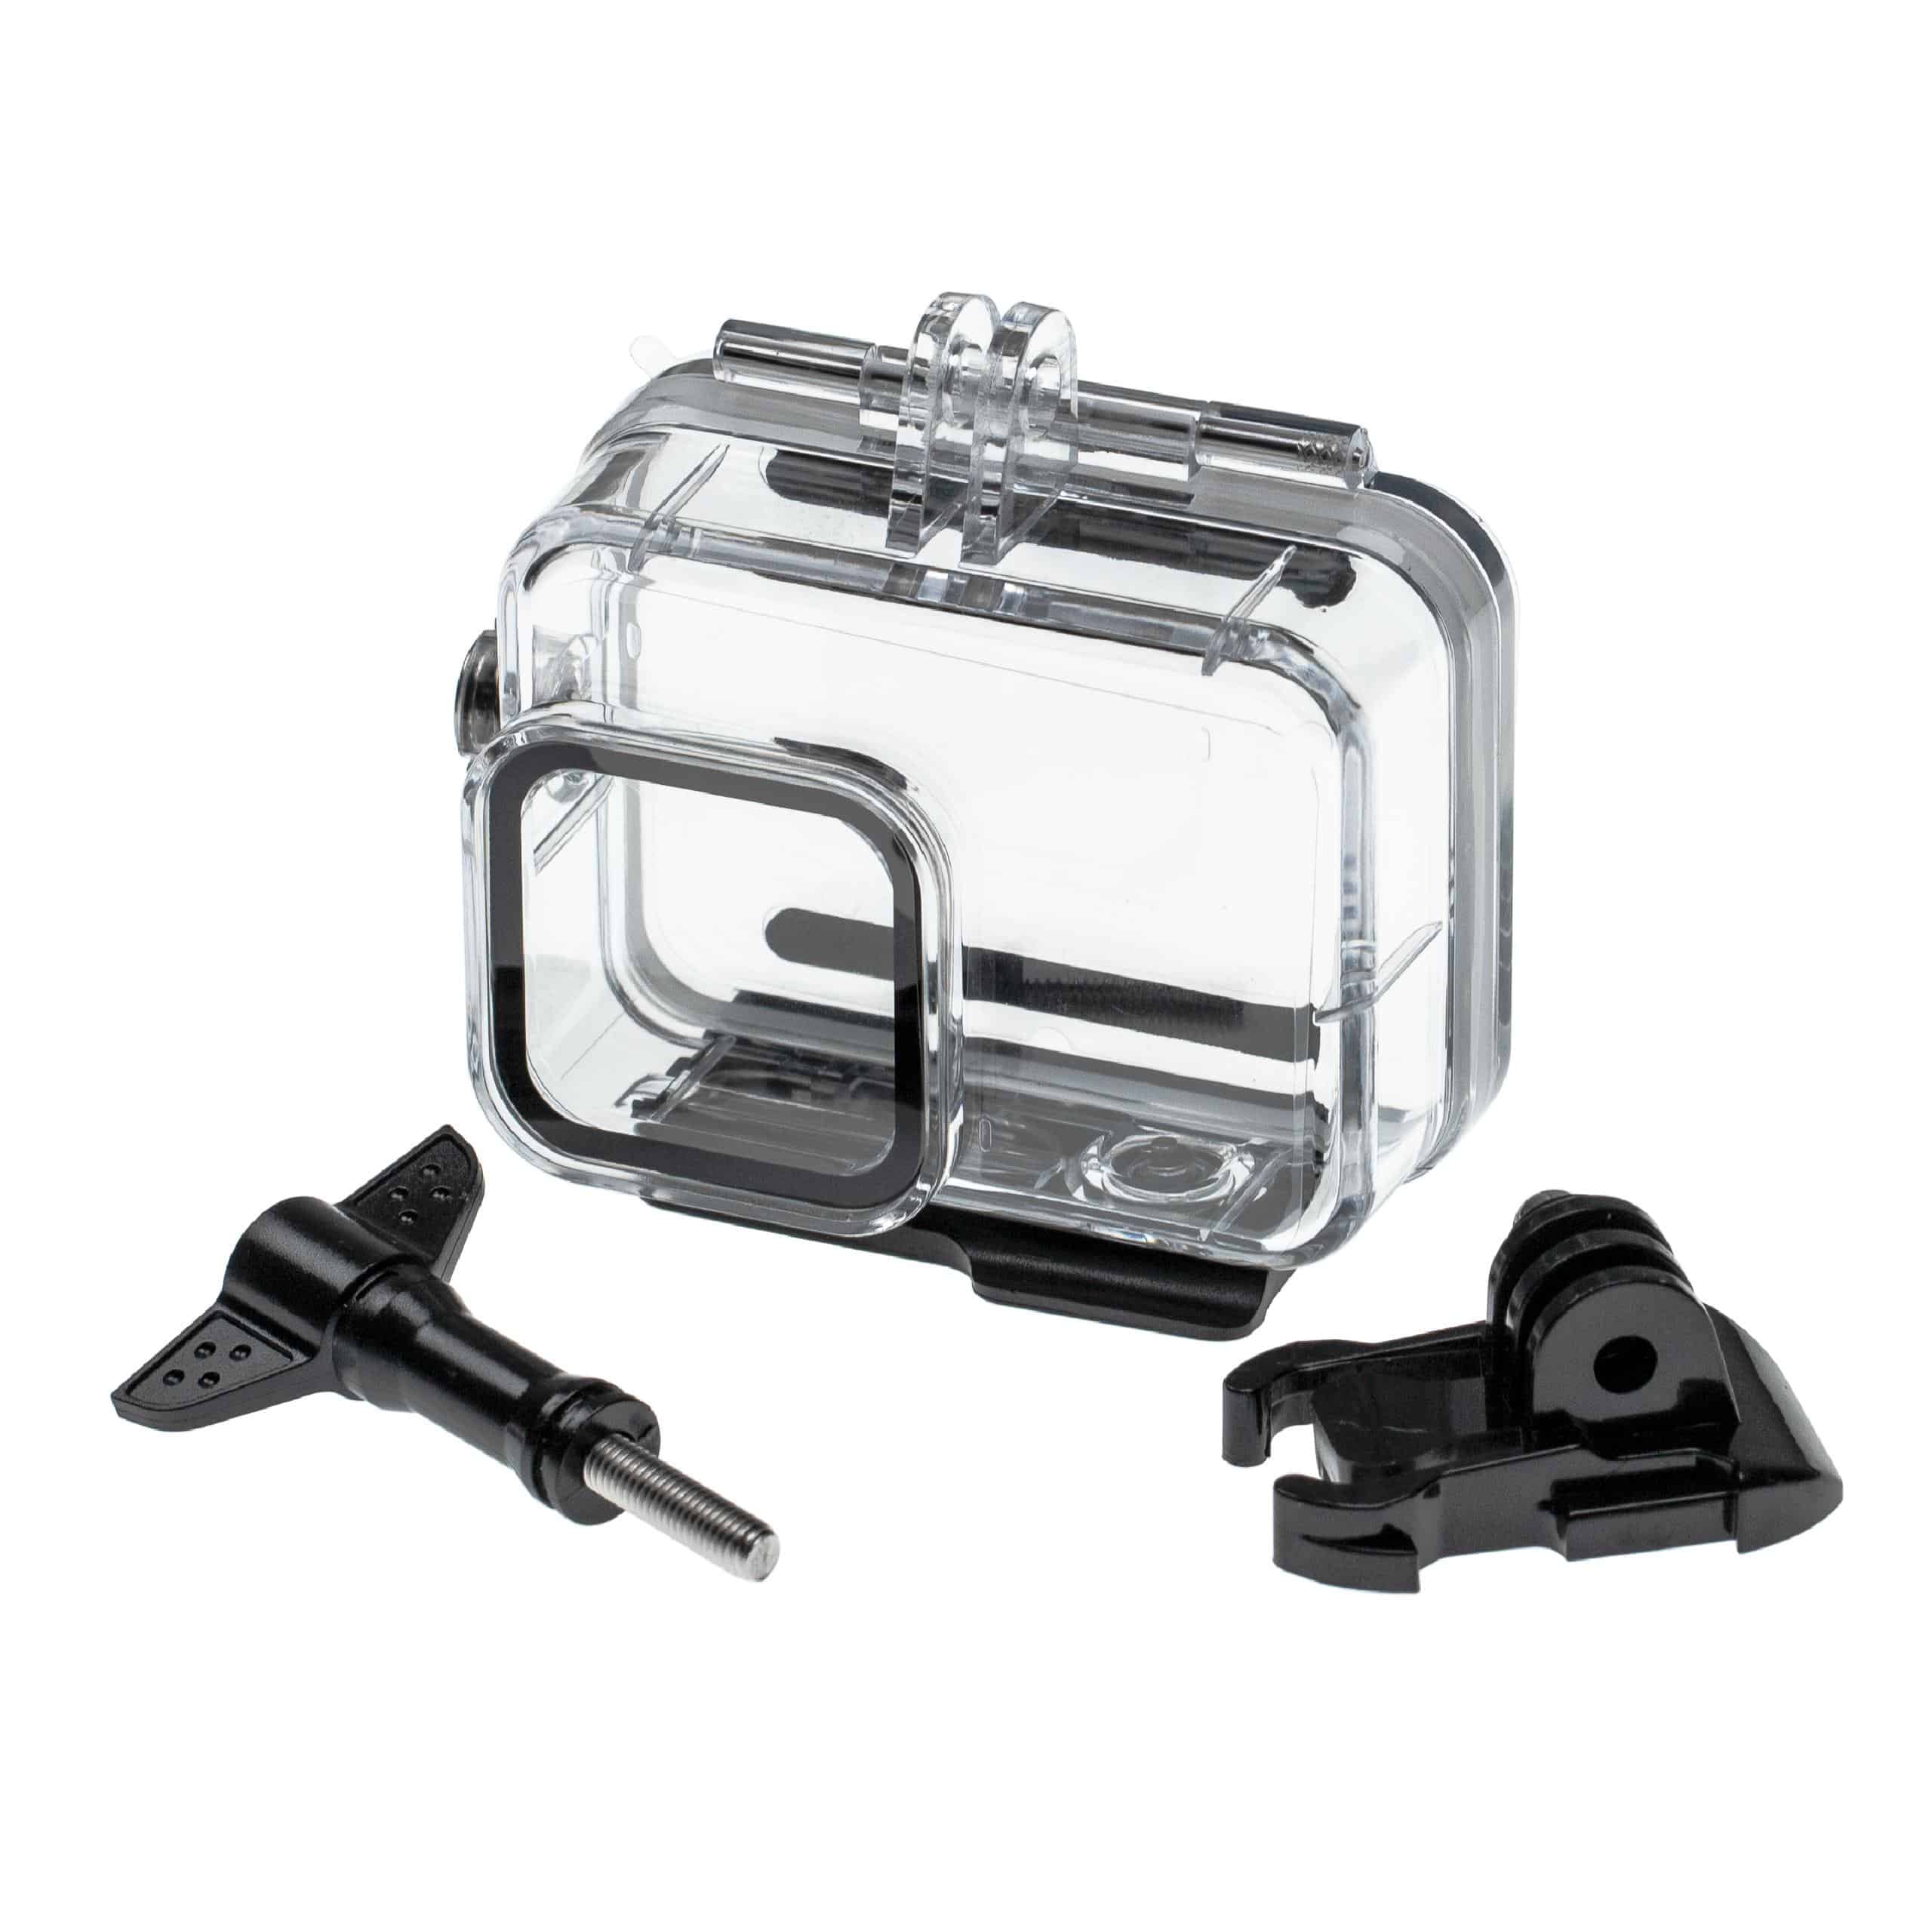 Underwater Housing suitable for GoPro Hero 8 Action Camera - Up to a max. Depth of 60 m